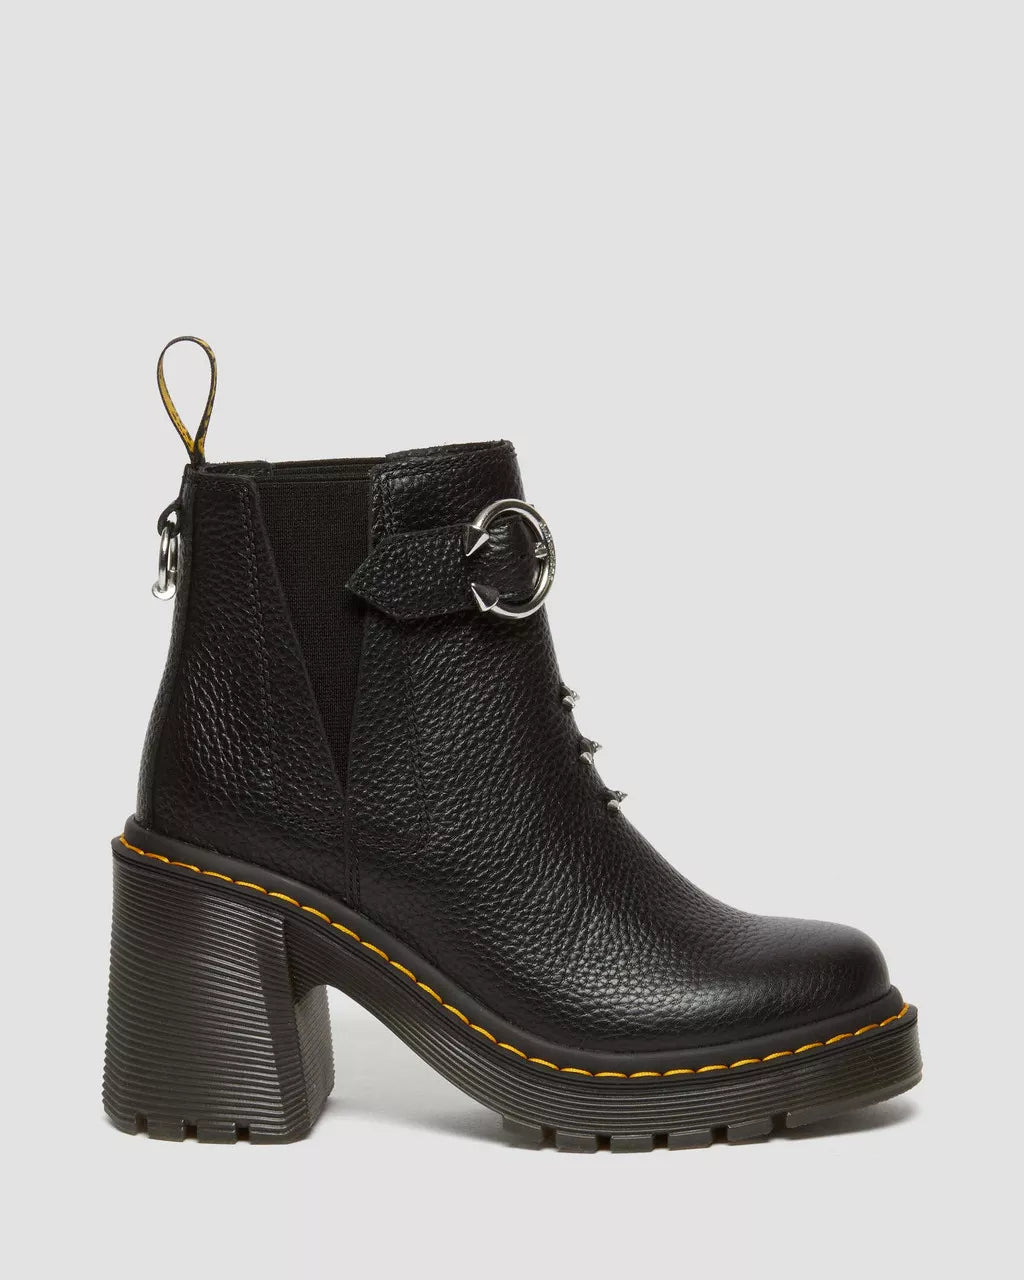 Spence Piercing Leather Flared Heel Chelsea Boots